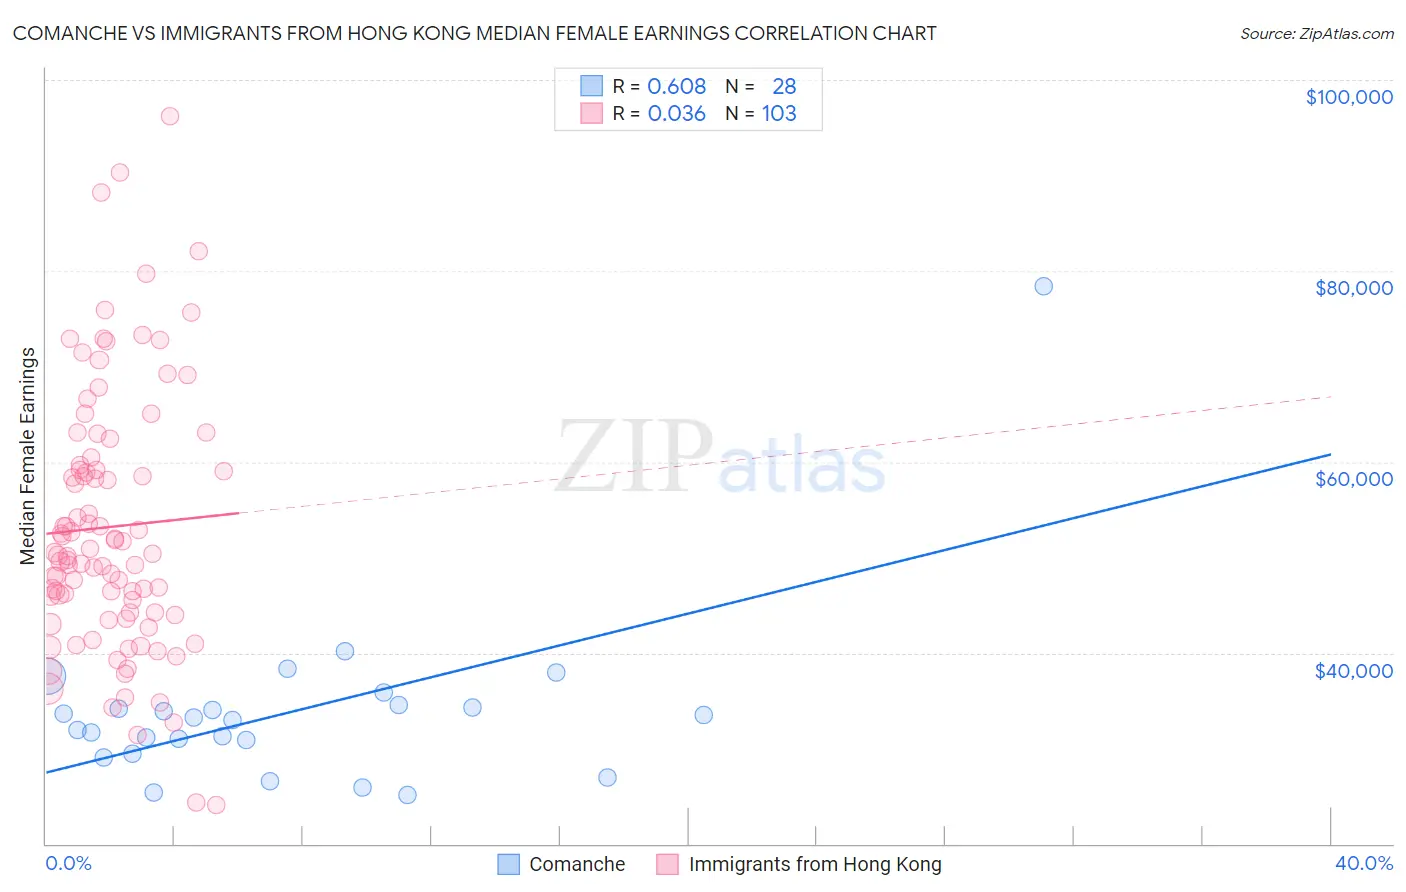 Comanche vs Immigrants from Hong Kong Median Female Earnings